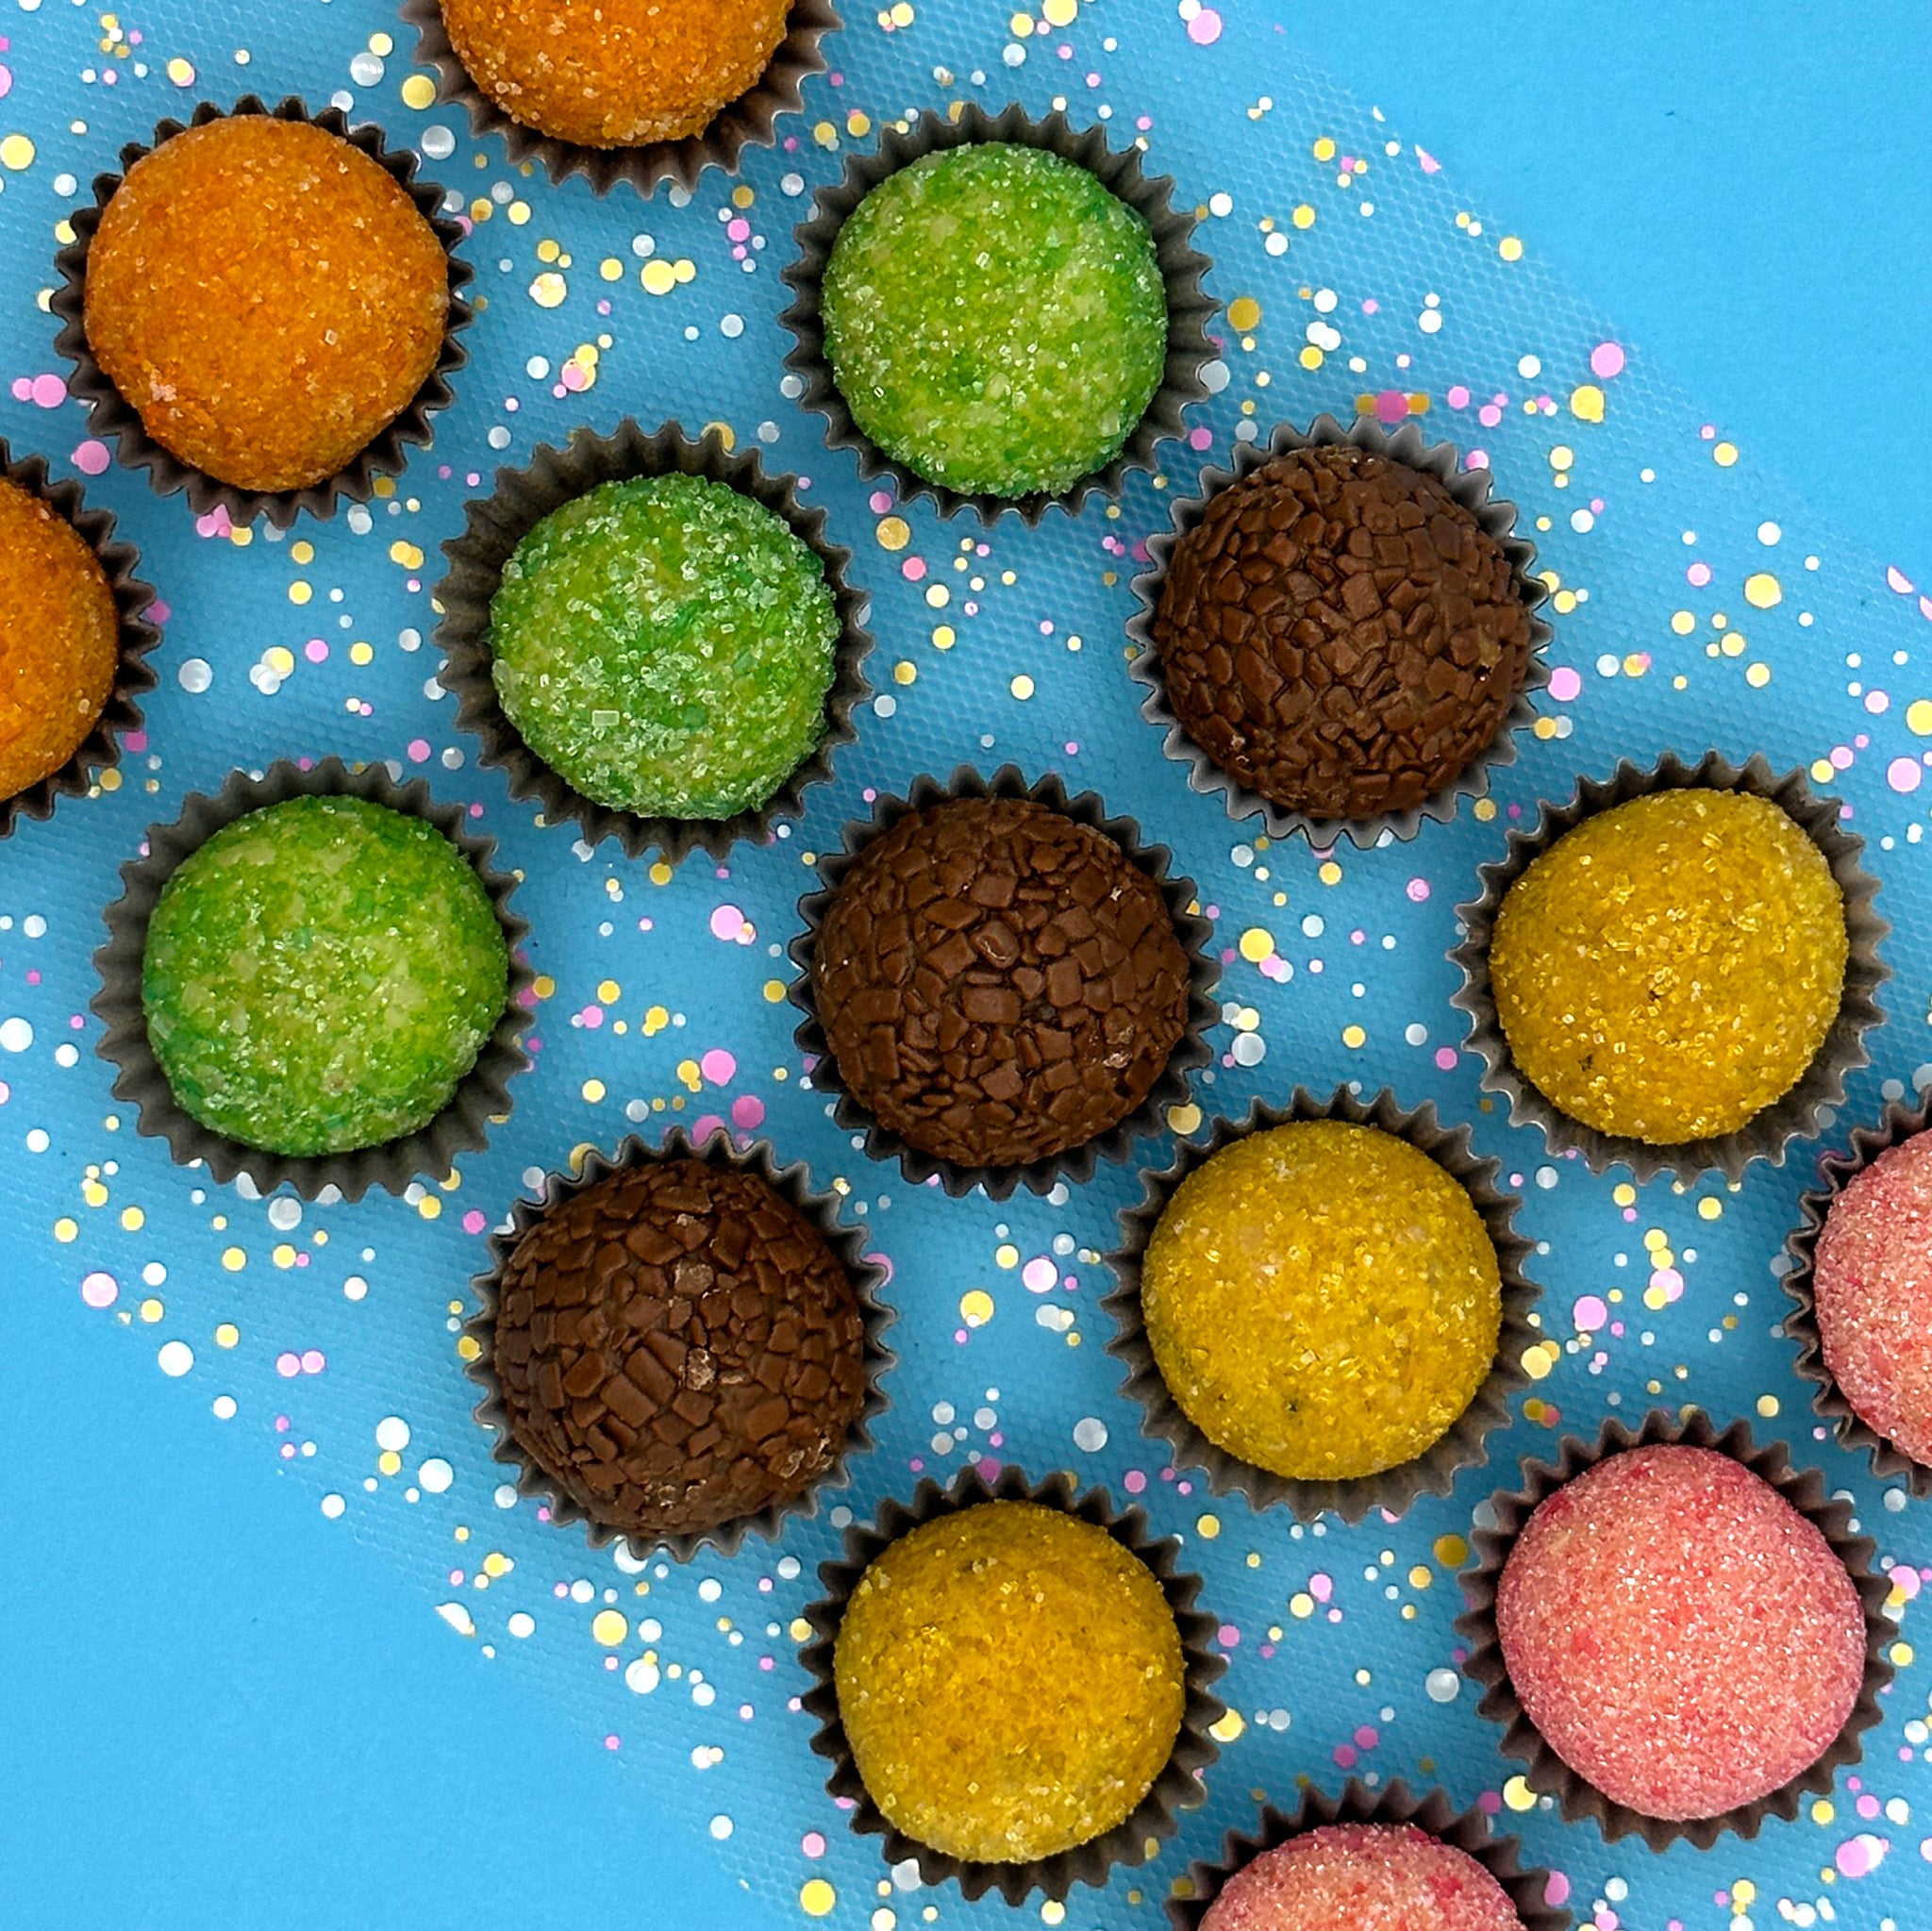 Anniversary Fruits Brigadeiros with sprinkles on a blue background are the perfect sweet decision for an anniversary gift.